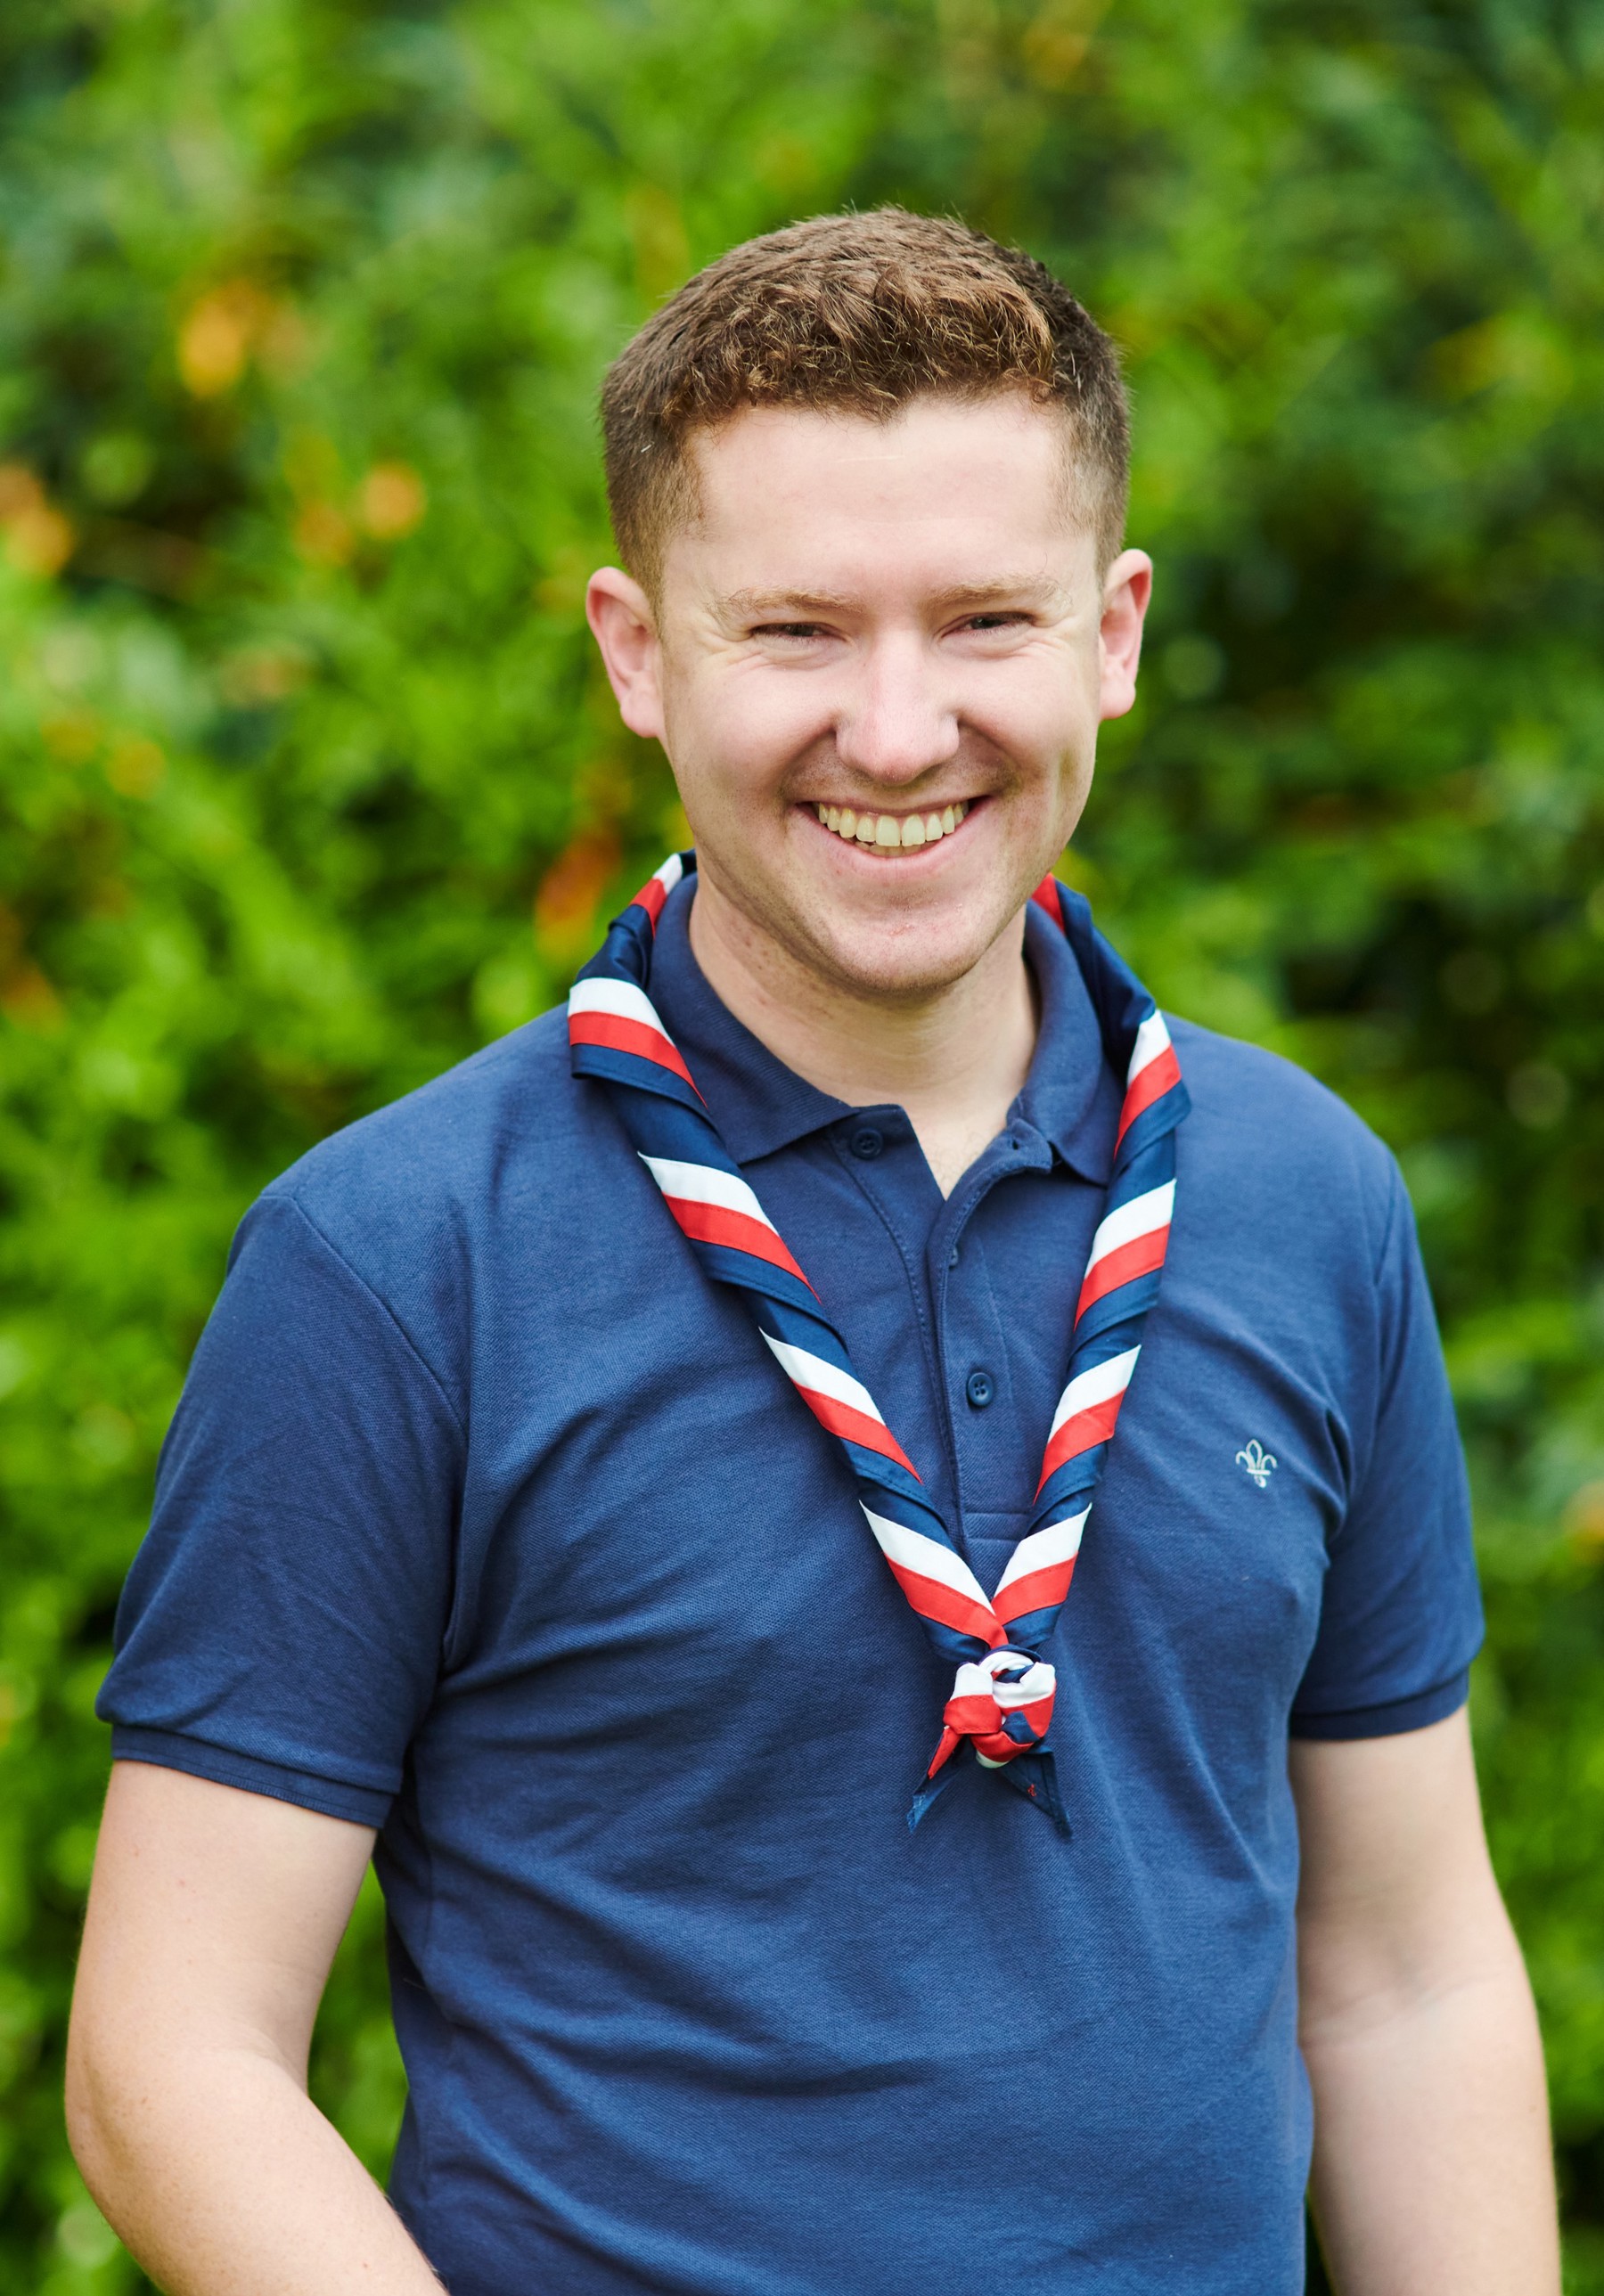 Ollie Wood smiling at the camera while wearing a navy Scouts polo shirt and stripy scarf